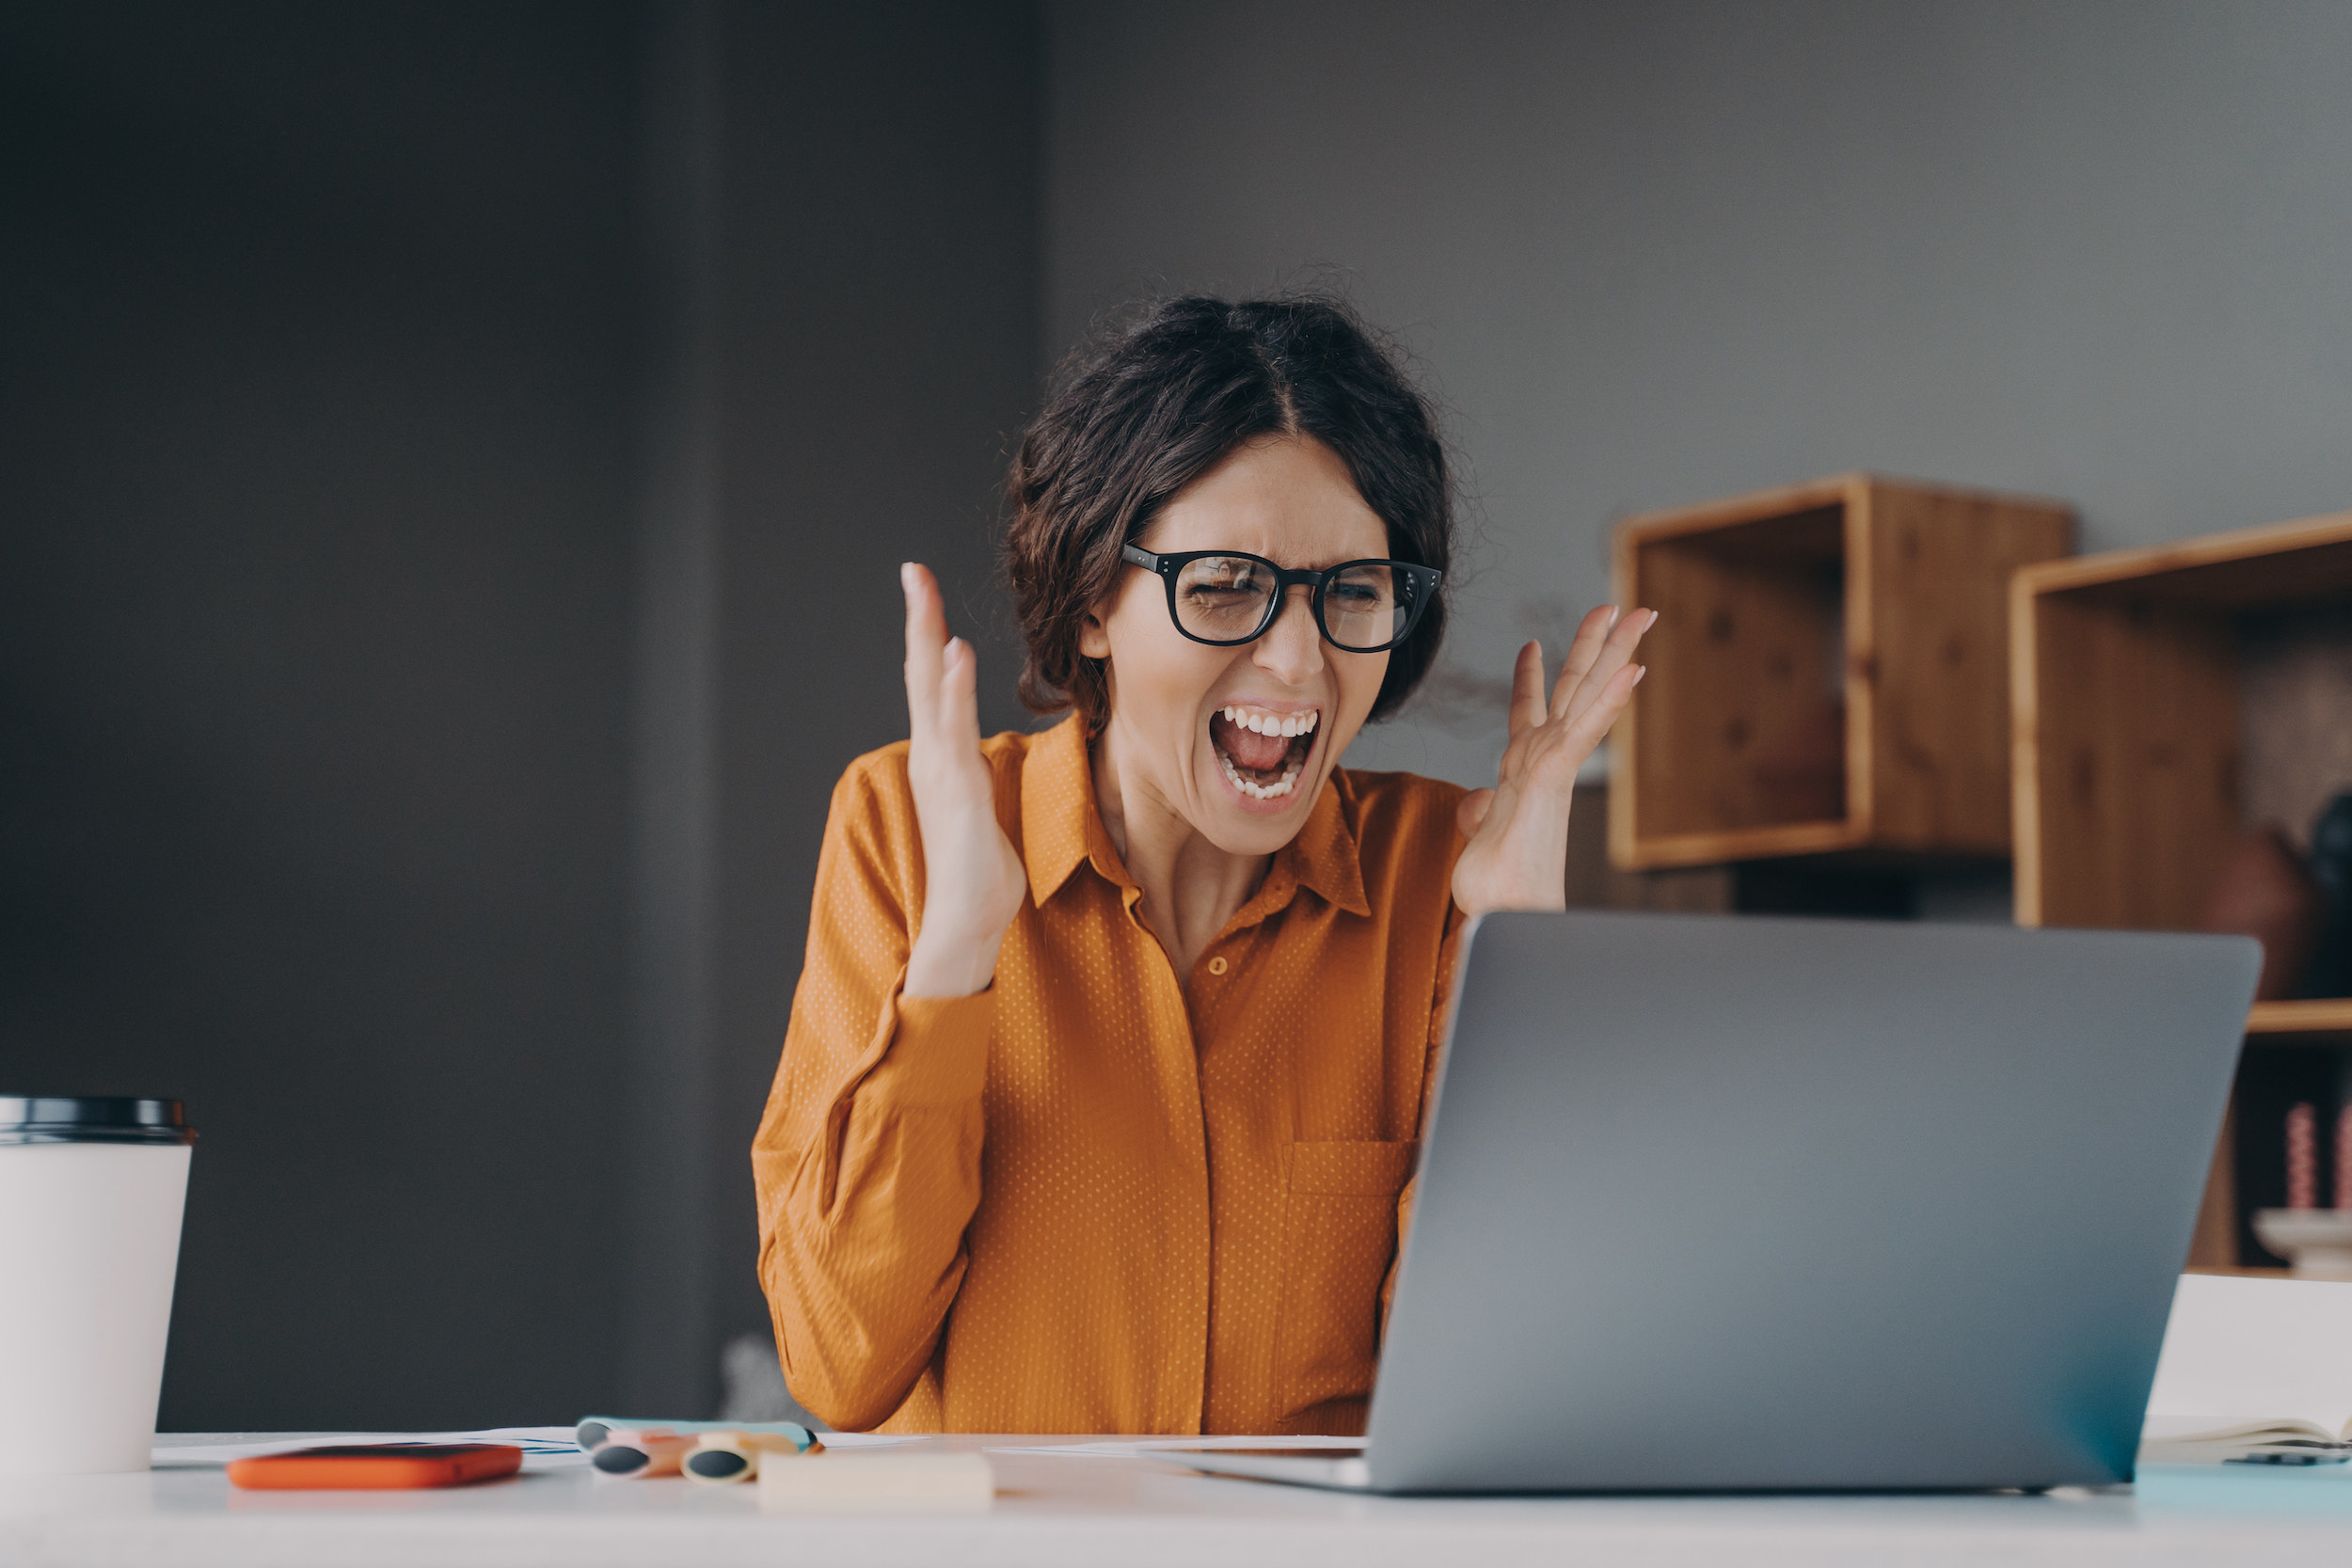 A woman screaming in front of her laptop